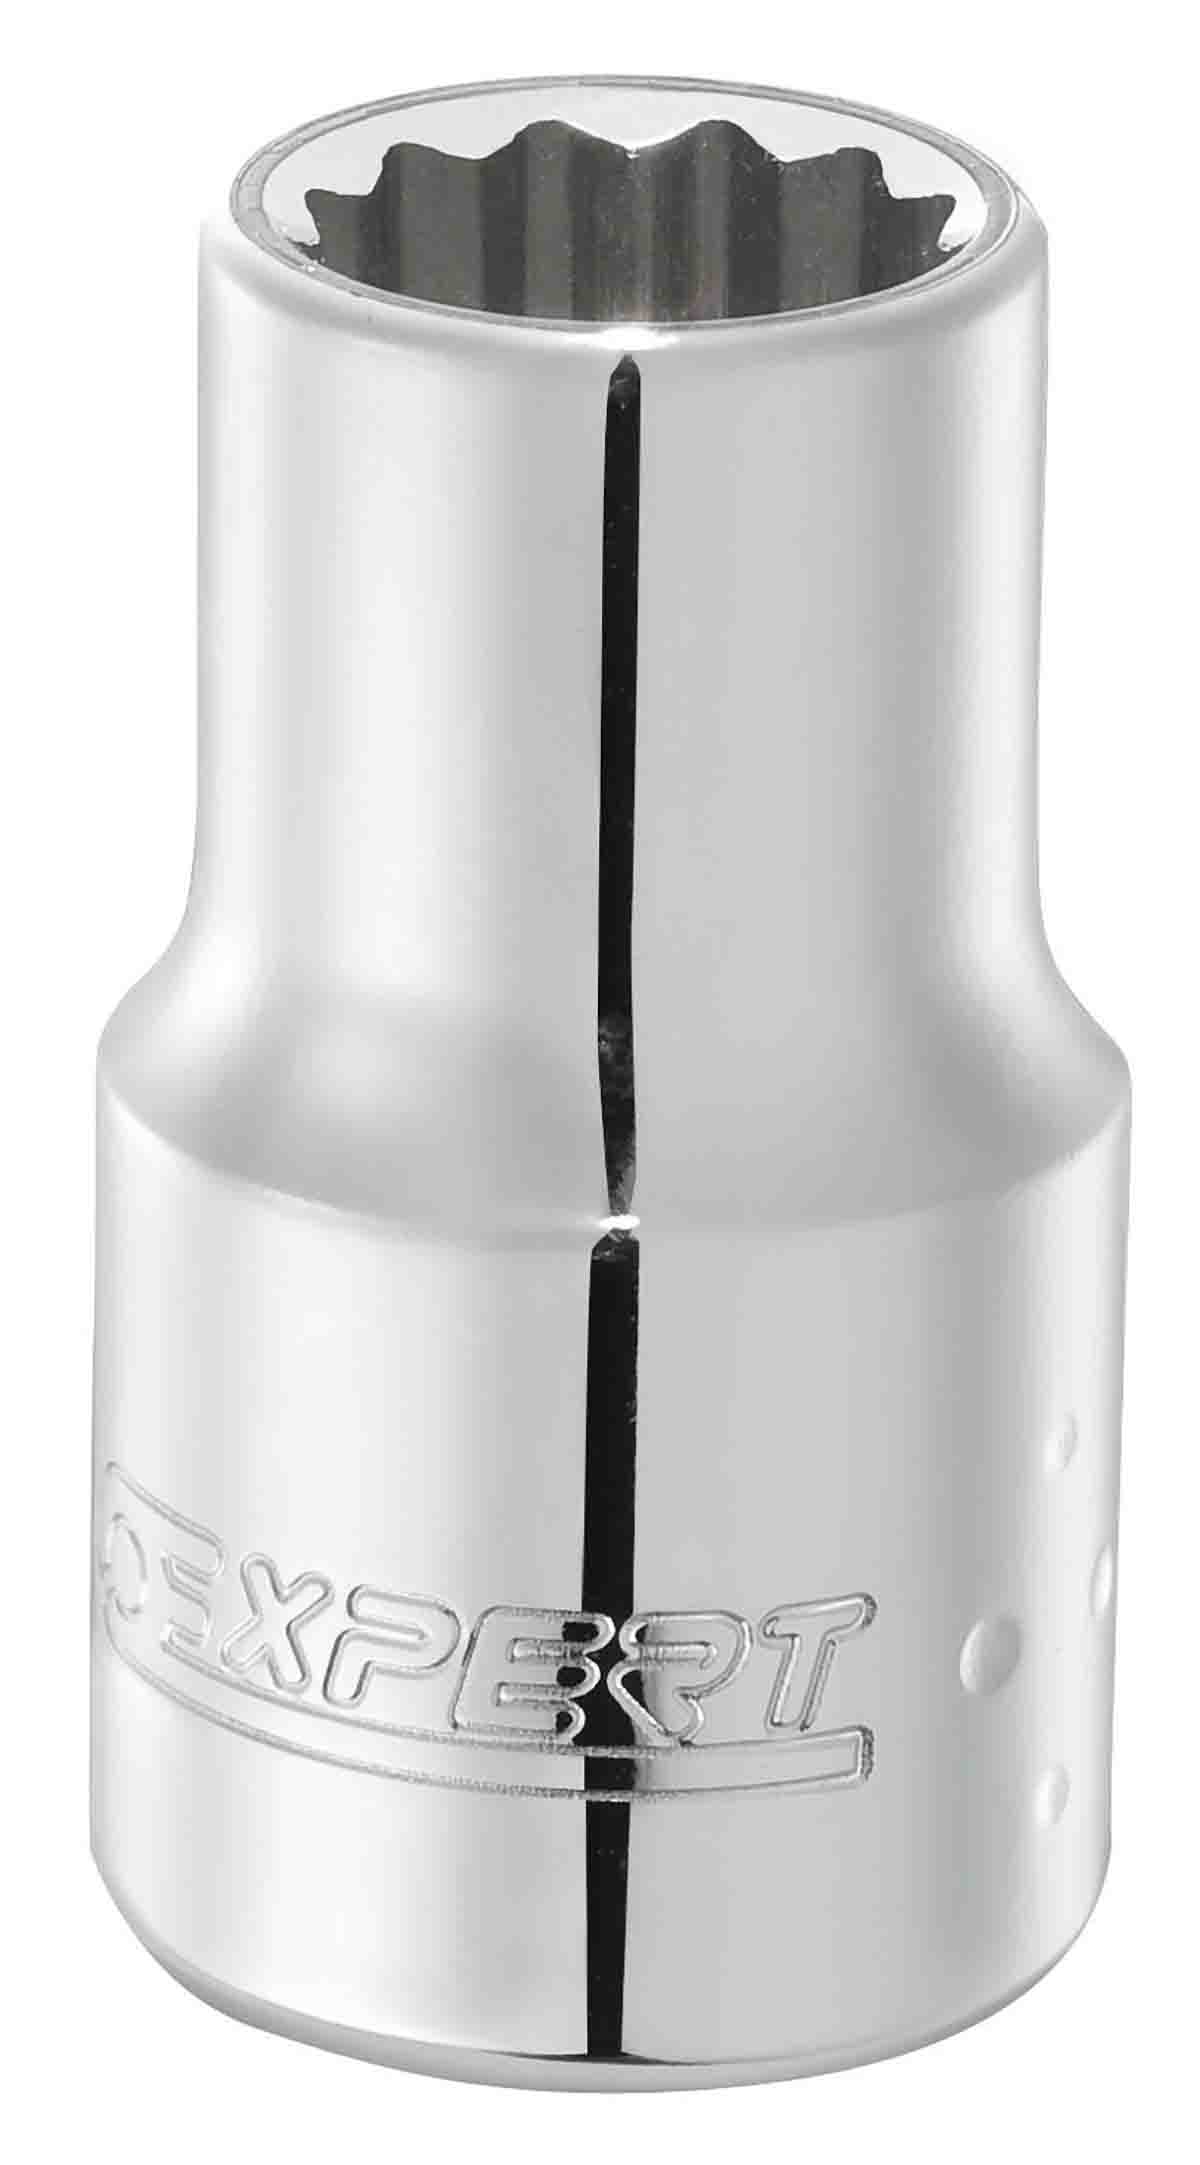 Expert by Facom 19mm Bi-Hex Socket With 1/2 in Drive , Length 38 mm